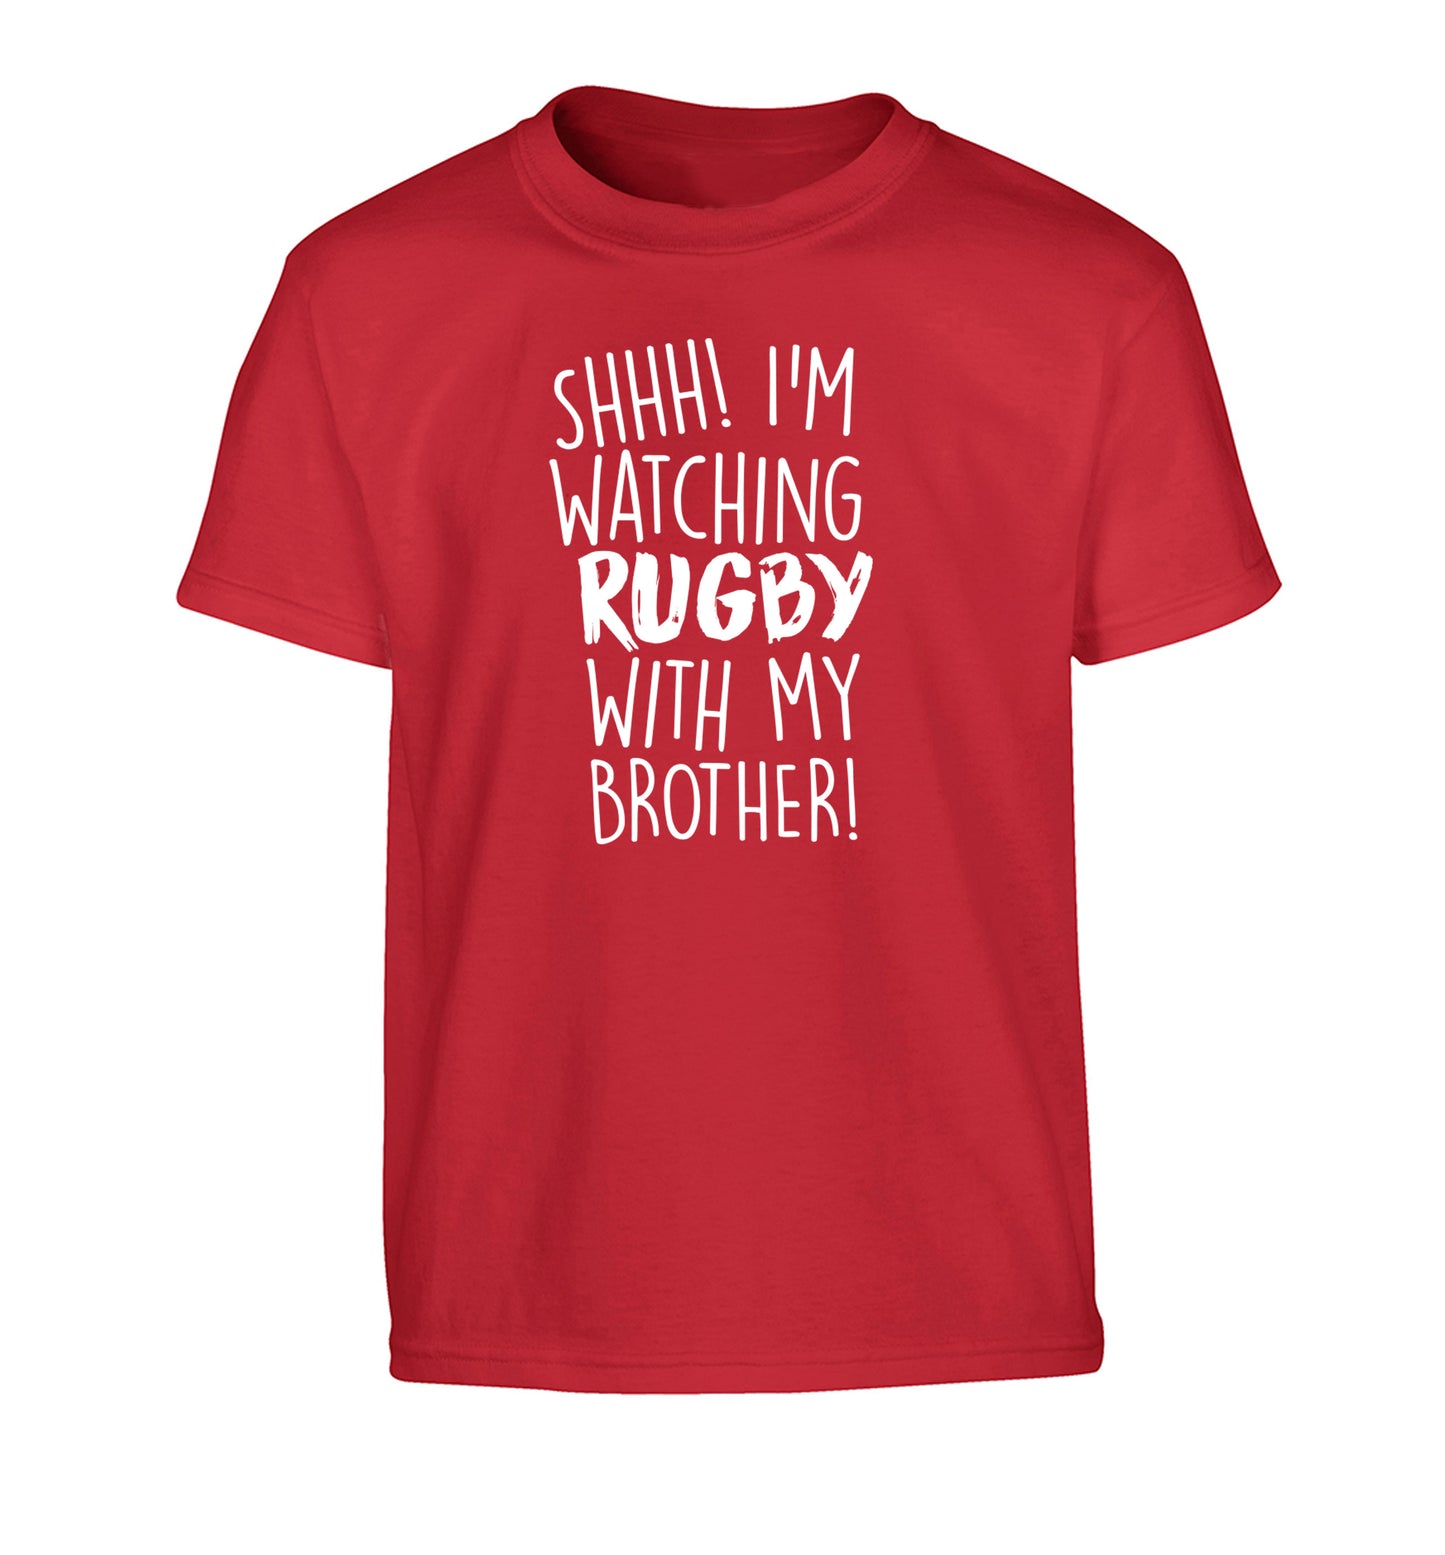 Shh... I'm watching rugby with my brother Children's red Tshirt 12-13 Years